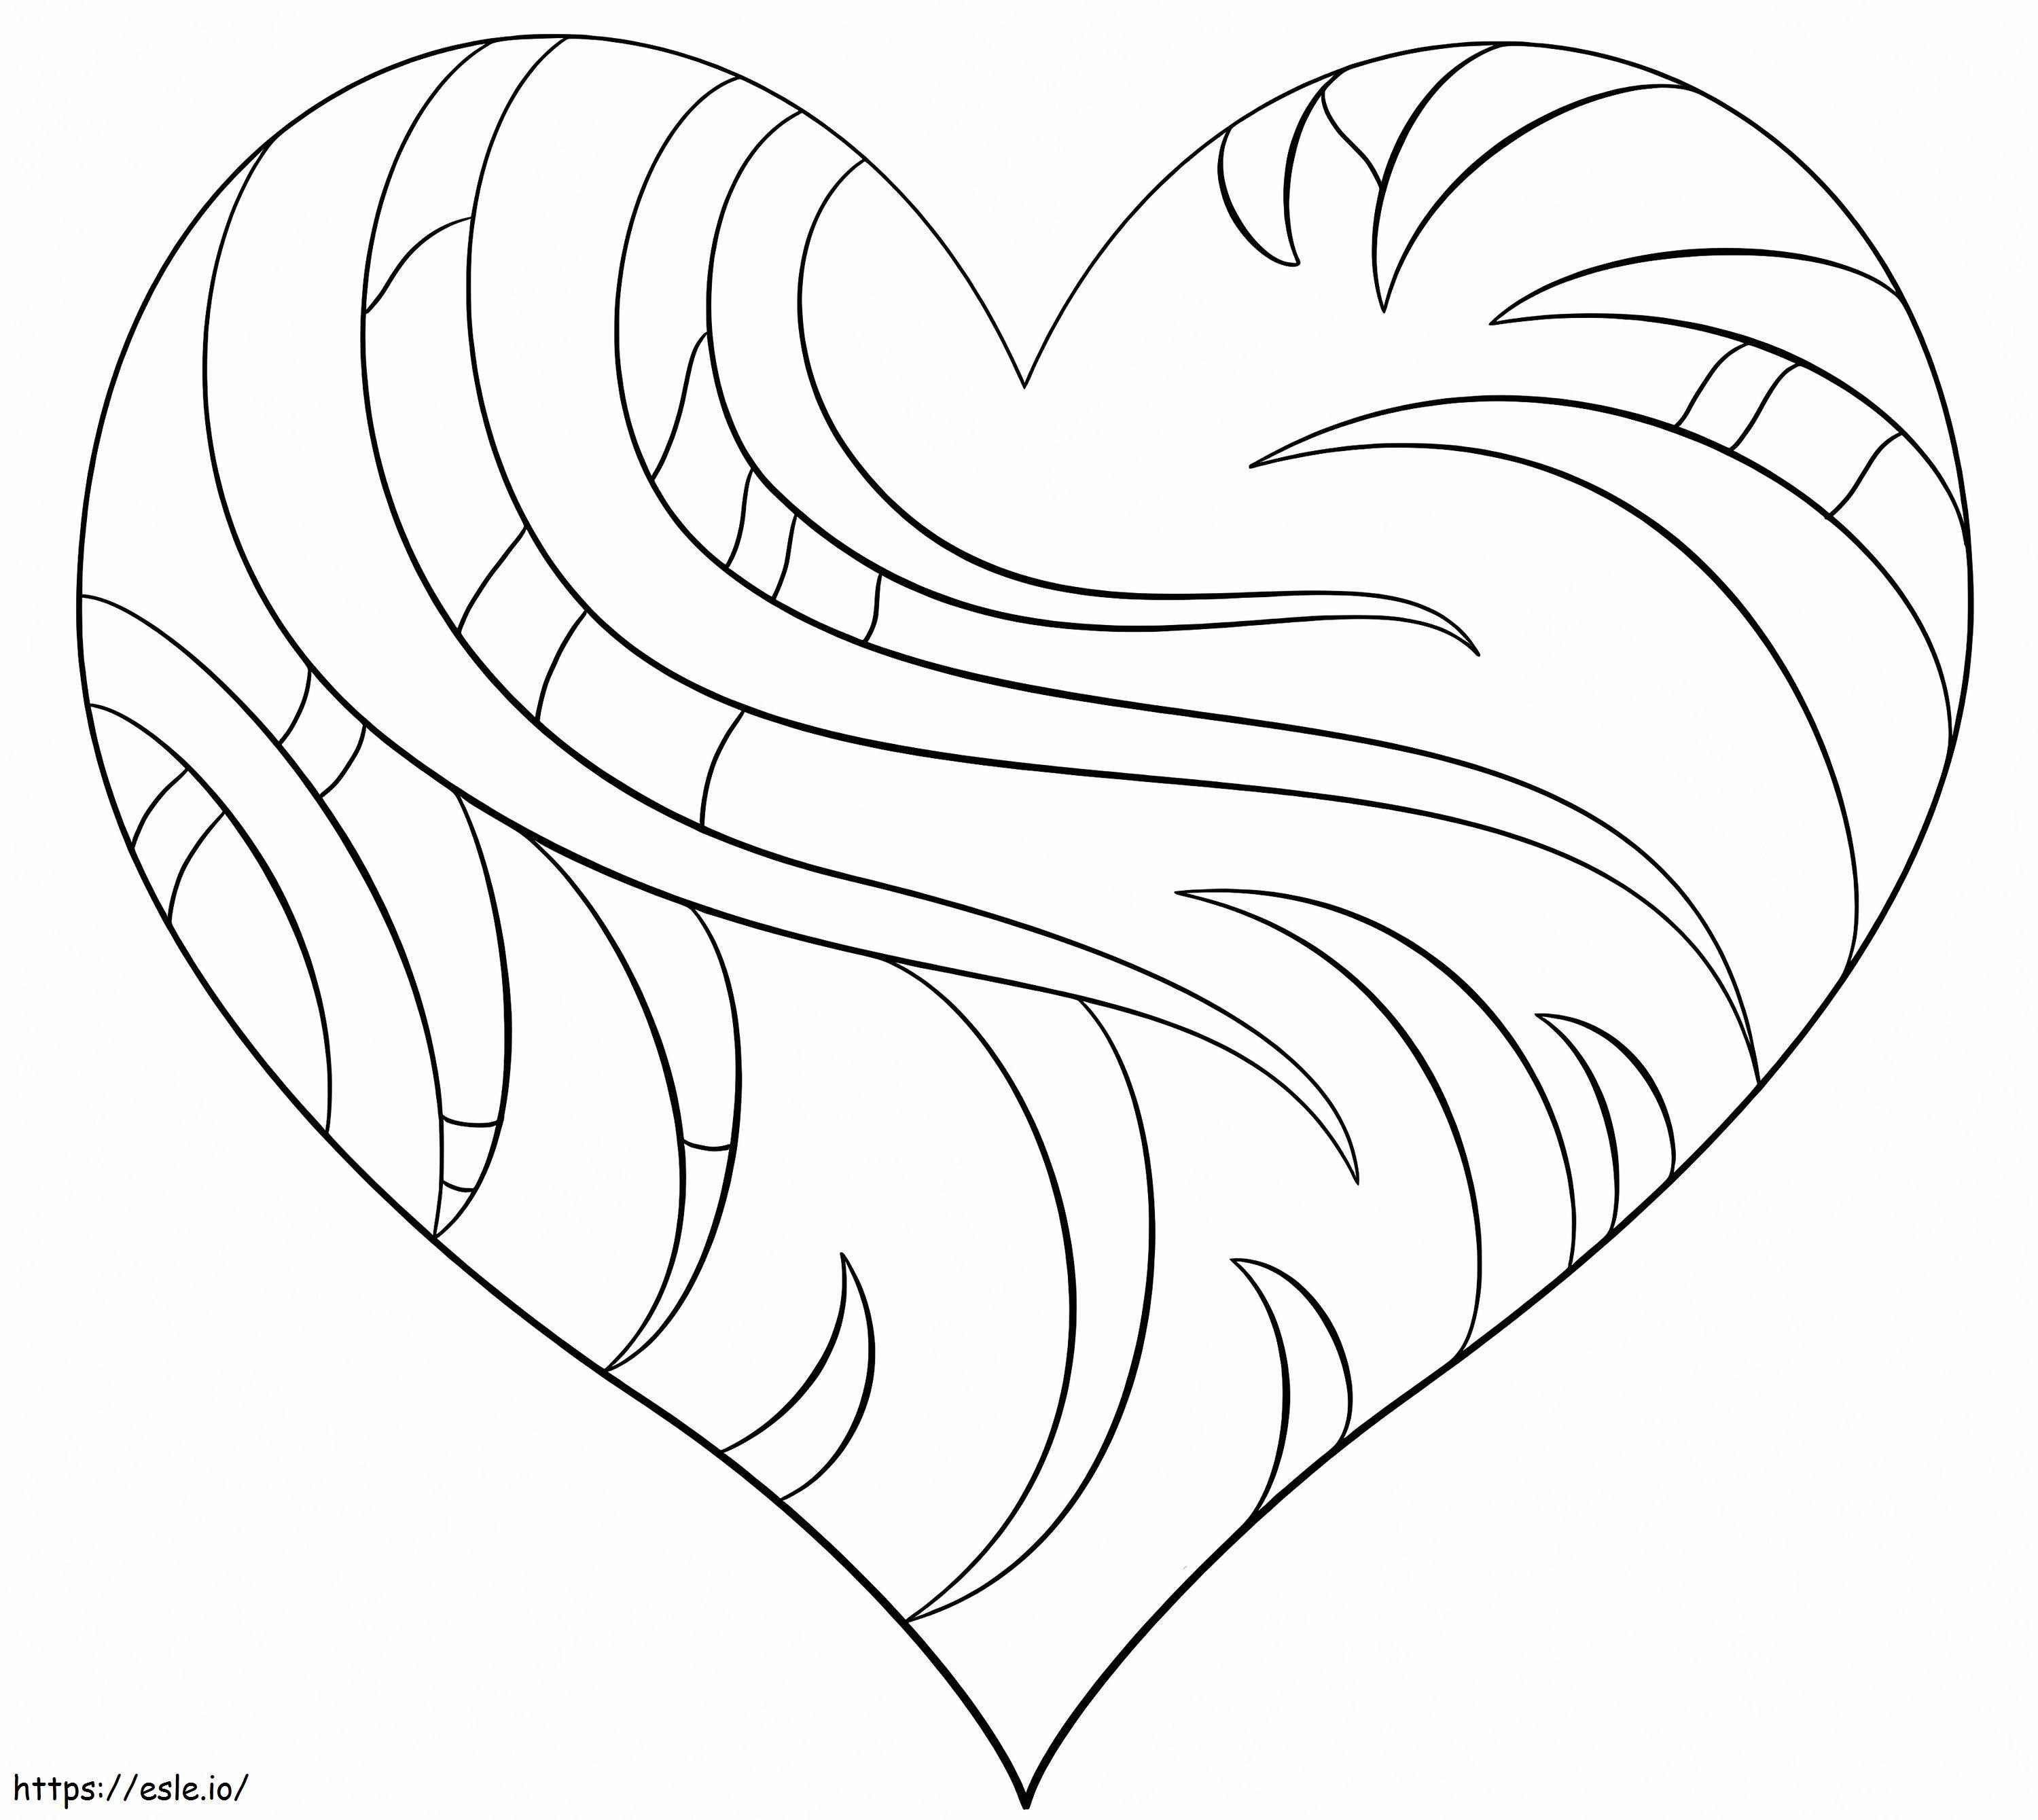 Intricate Heart coloring page